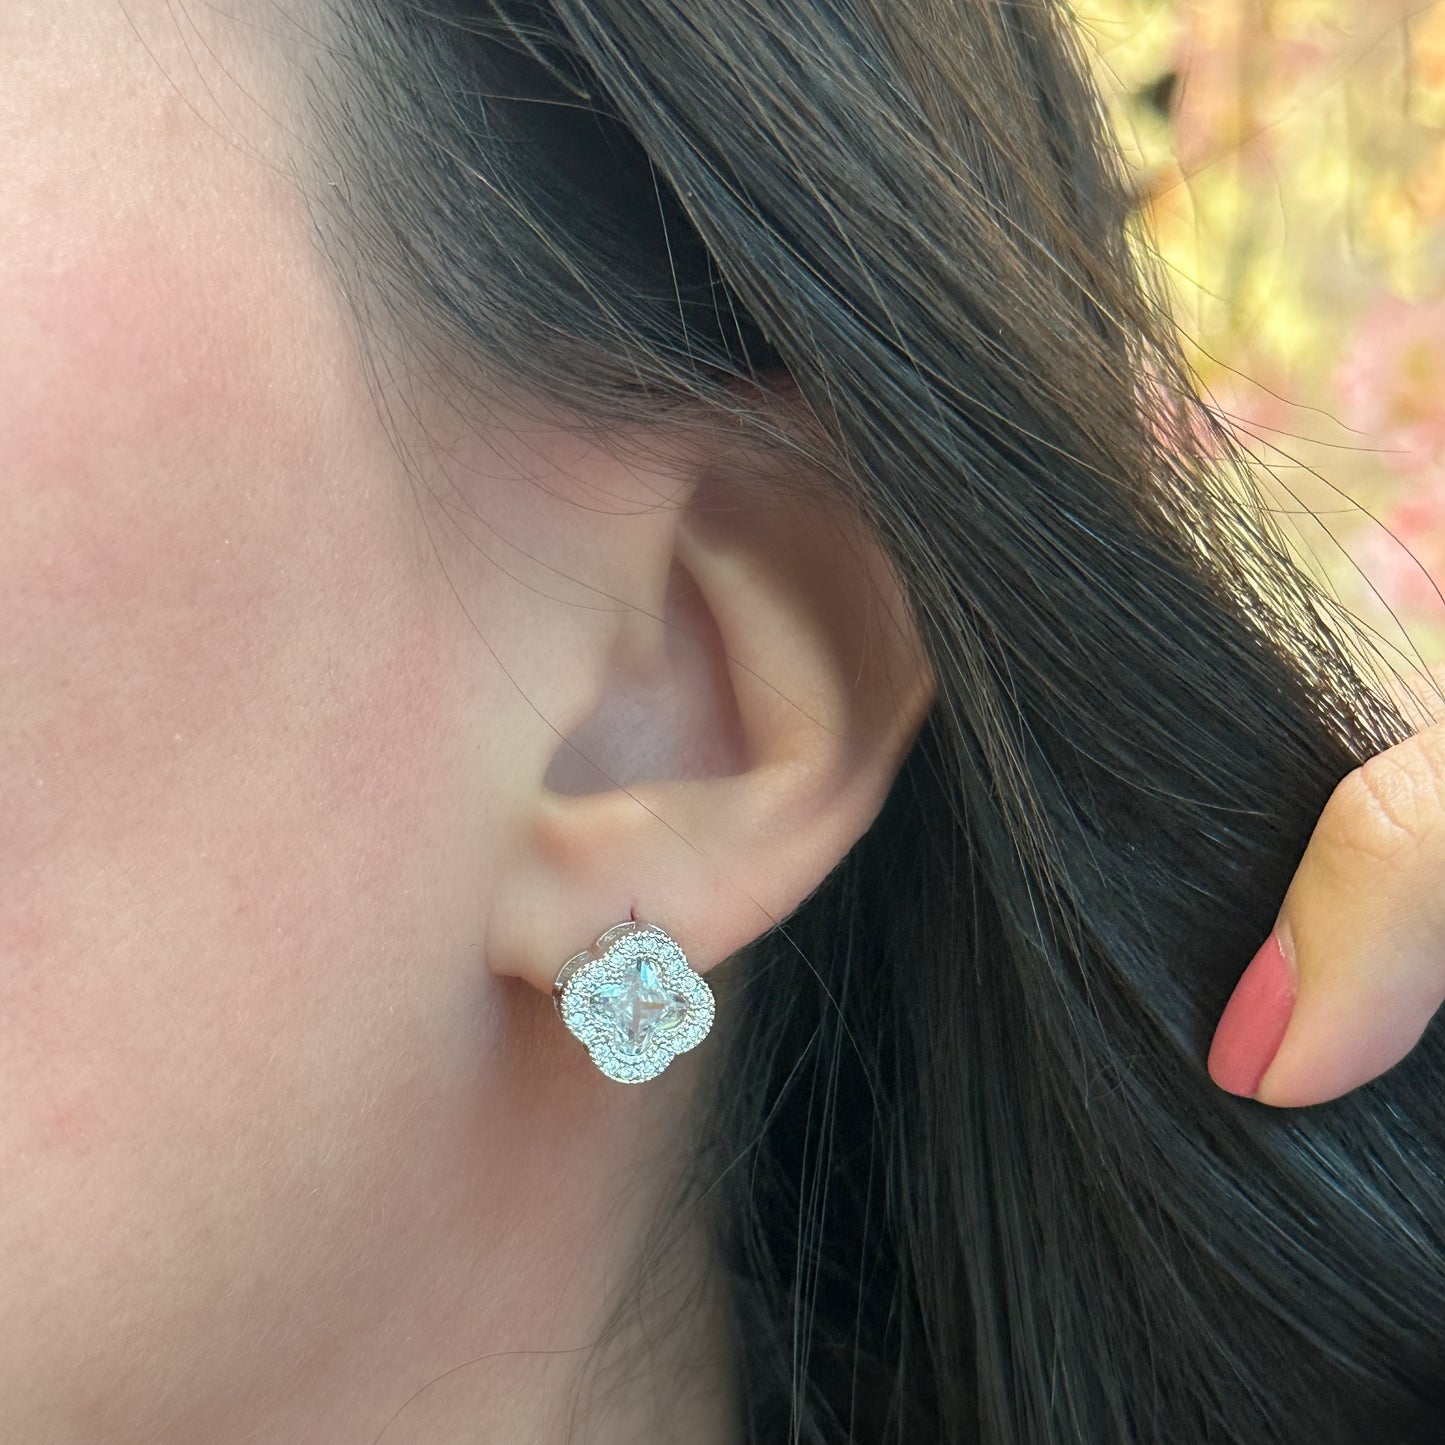 CLOVER EARRINGS | Double White Rhodium Plated